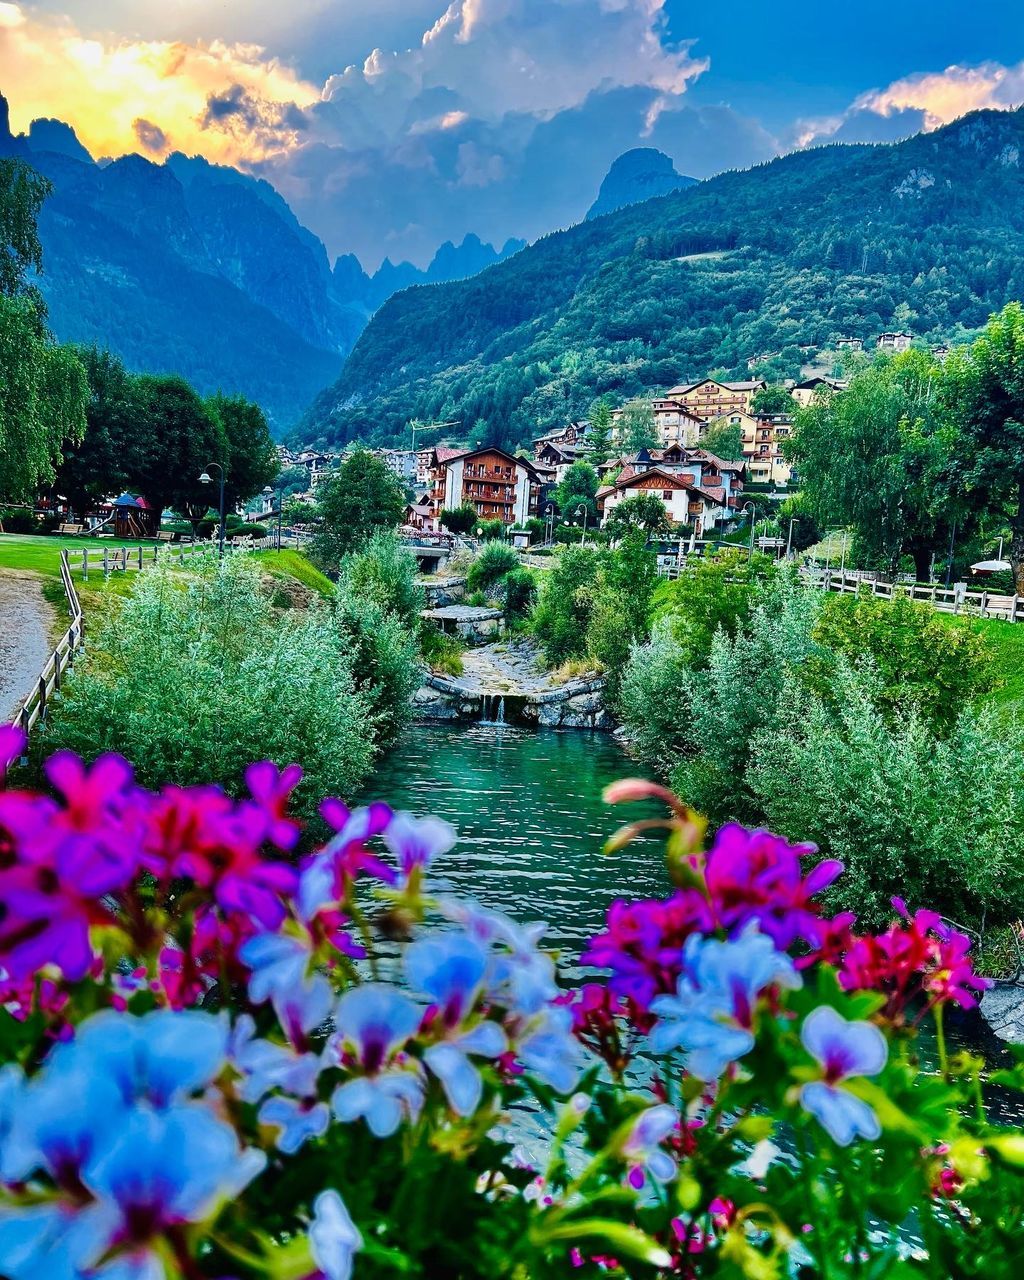 plant, flower, flowering plant, mountain, beauty in nature, nature, landscape, scenics - nature, environment, sky, mountain range, water, architecture, land, freshness, building, cloud, lake, meadow, built structure, travel destinations, building exterior, no people, tree, travel, multi colored, tranquility, rural scene, outdoors, springtime, house, blue, city, growth, tranquil scene, summer, field, tourism, valley, village, residential district, idyllic, green, town, day